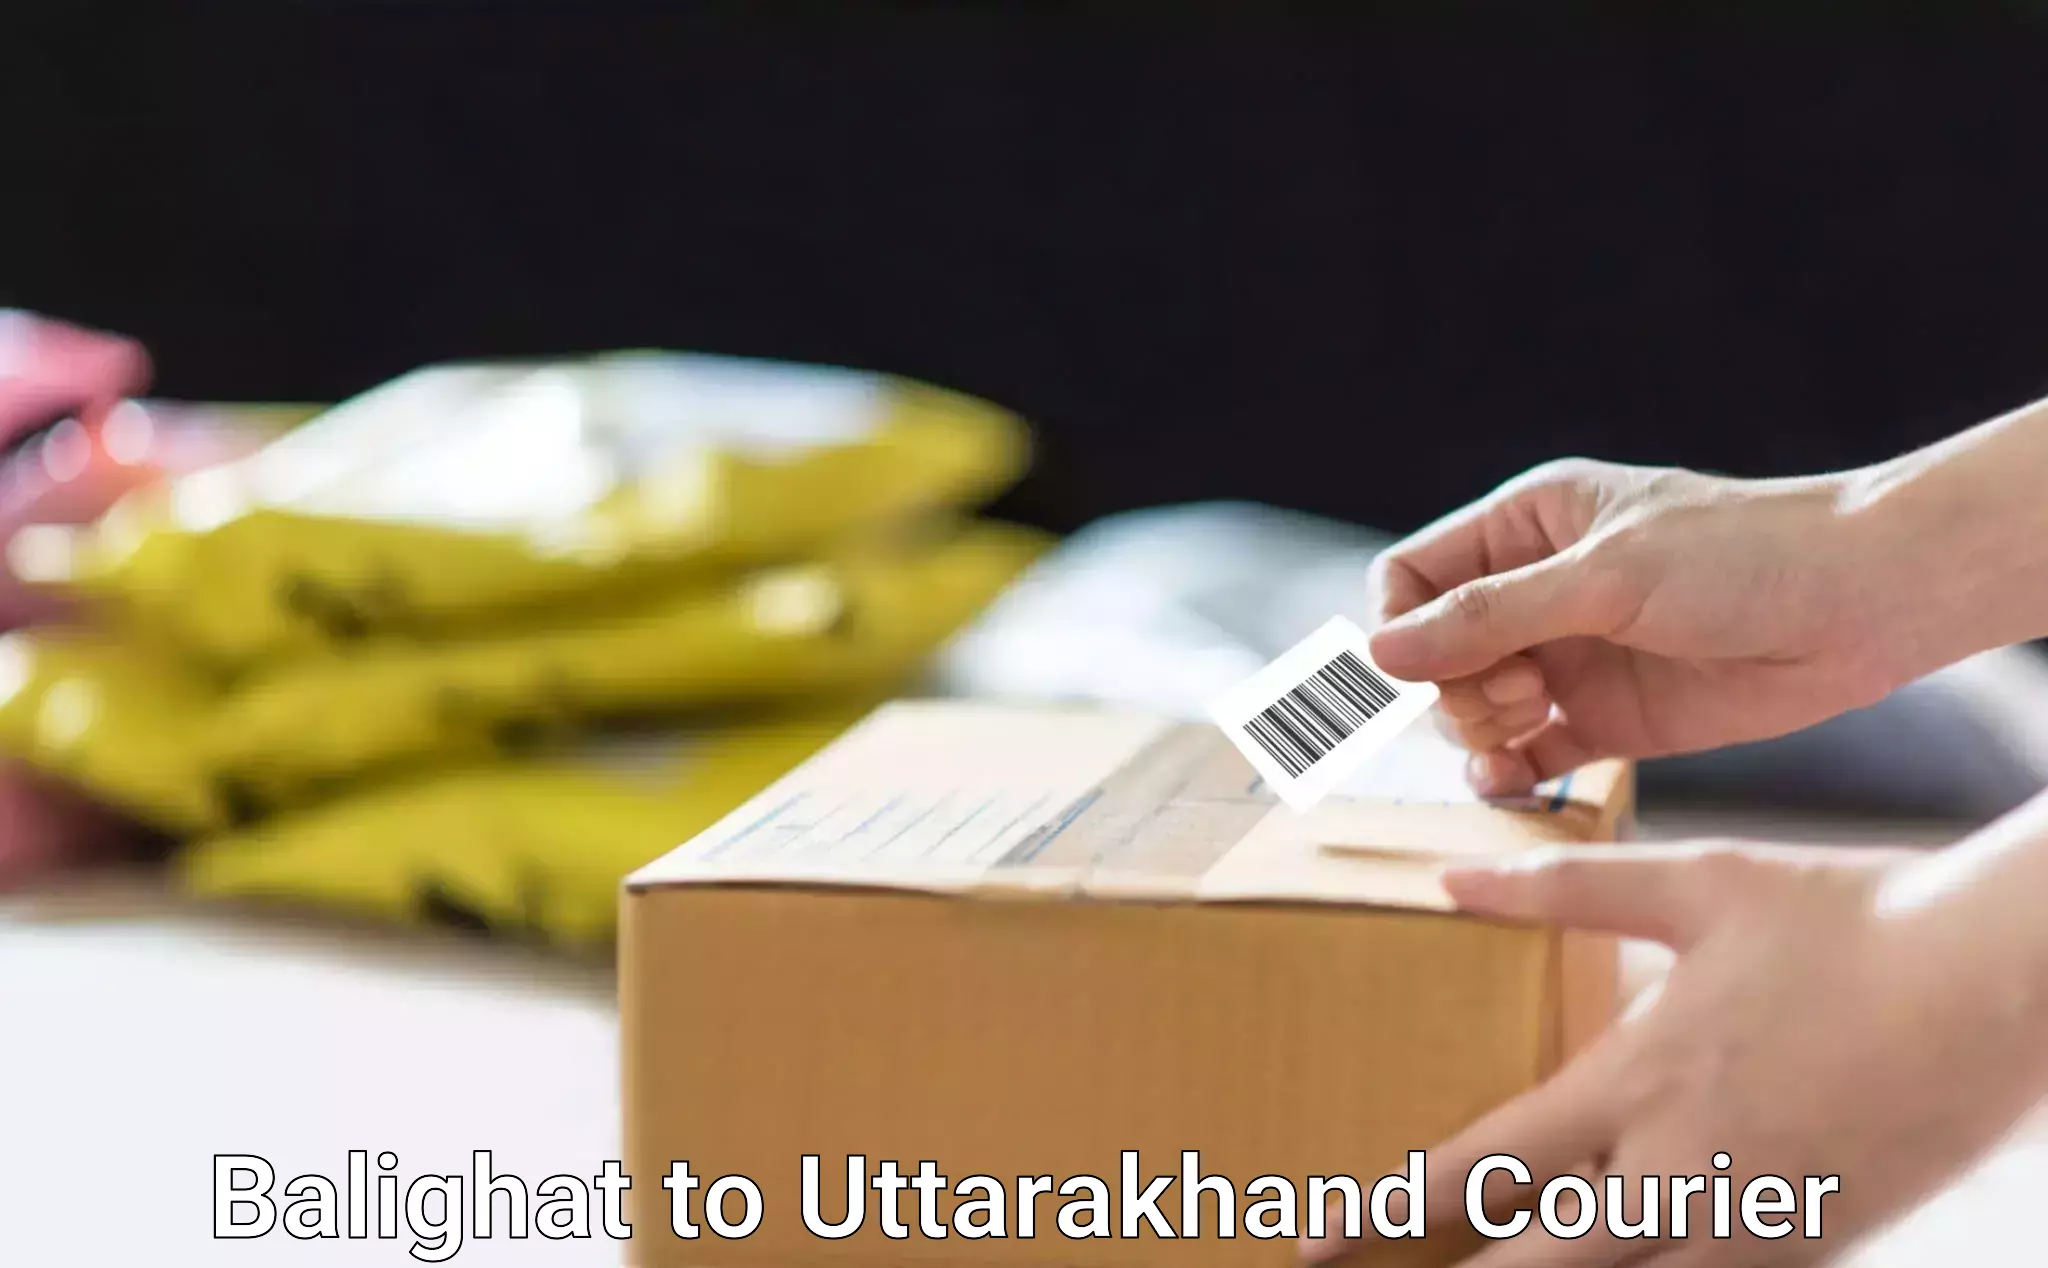 Customizable delivery plans Balighat to Uttarakhand